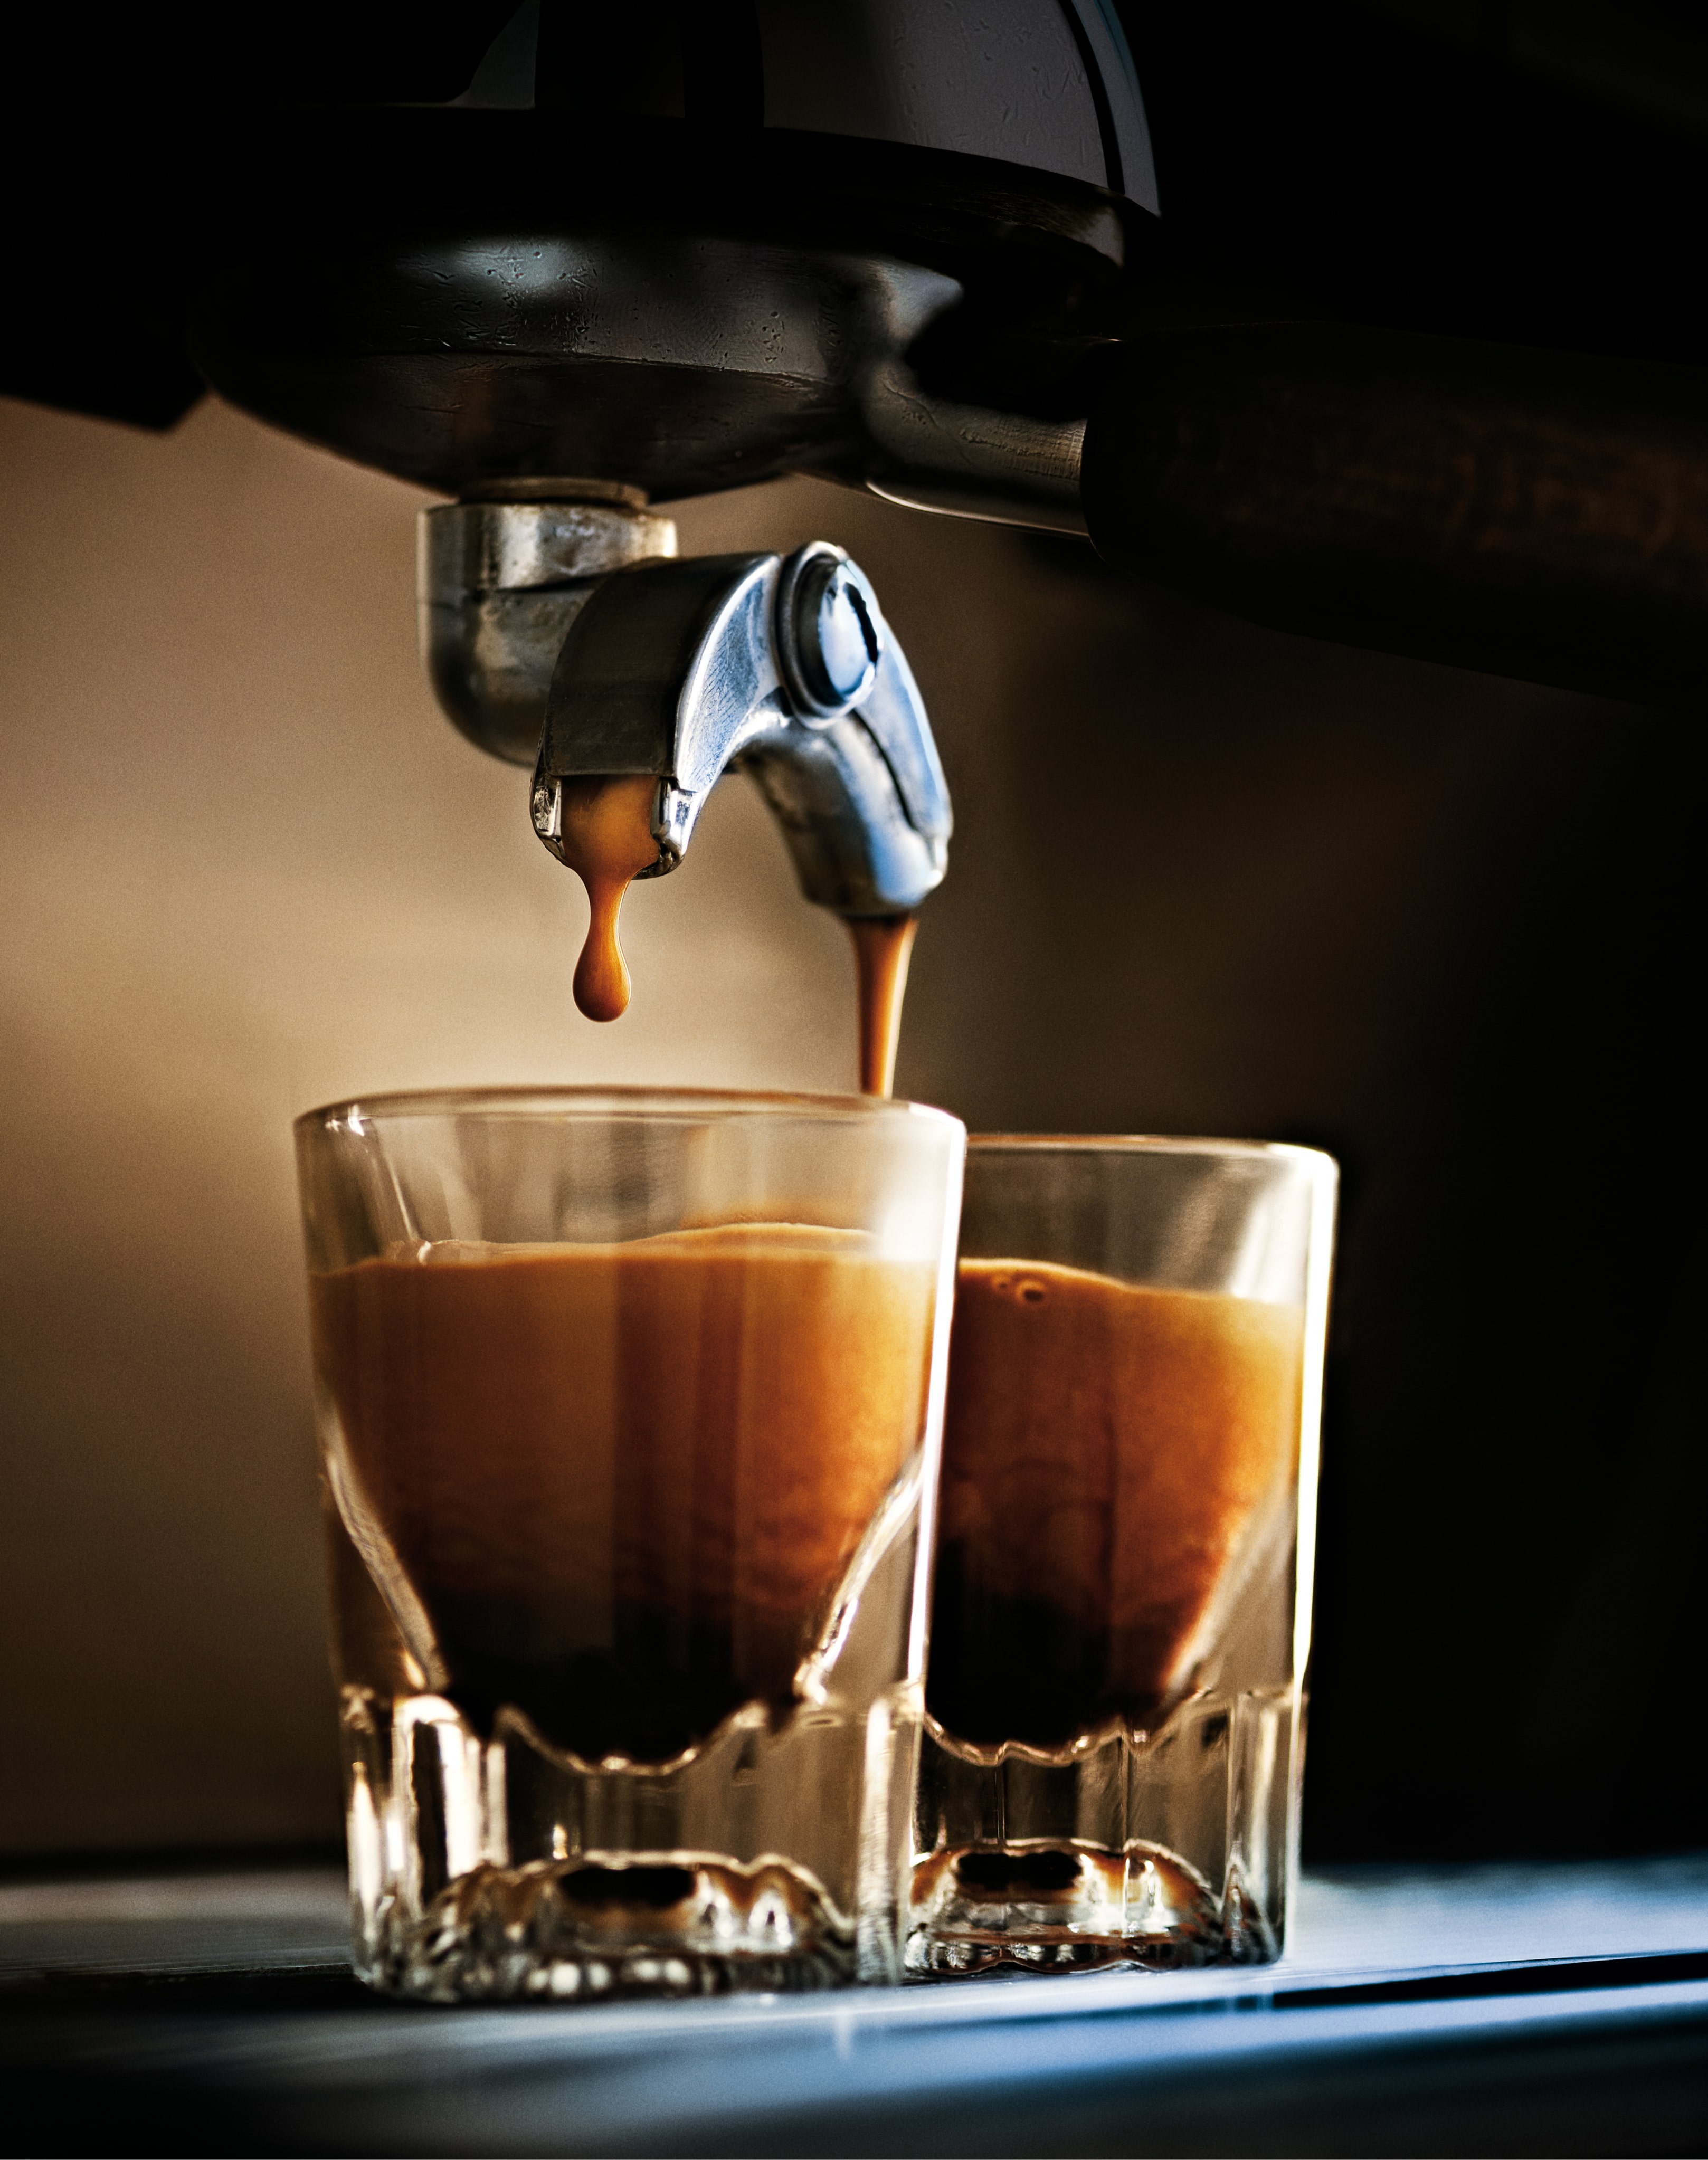 What Is Espresso?